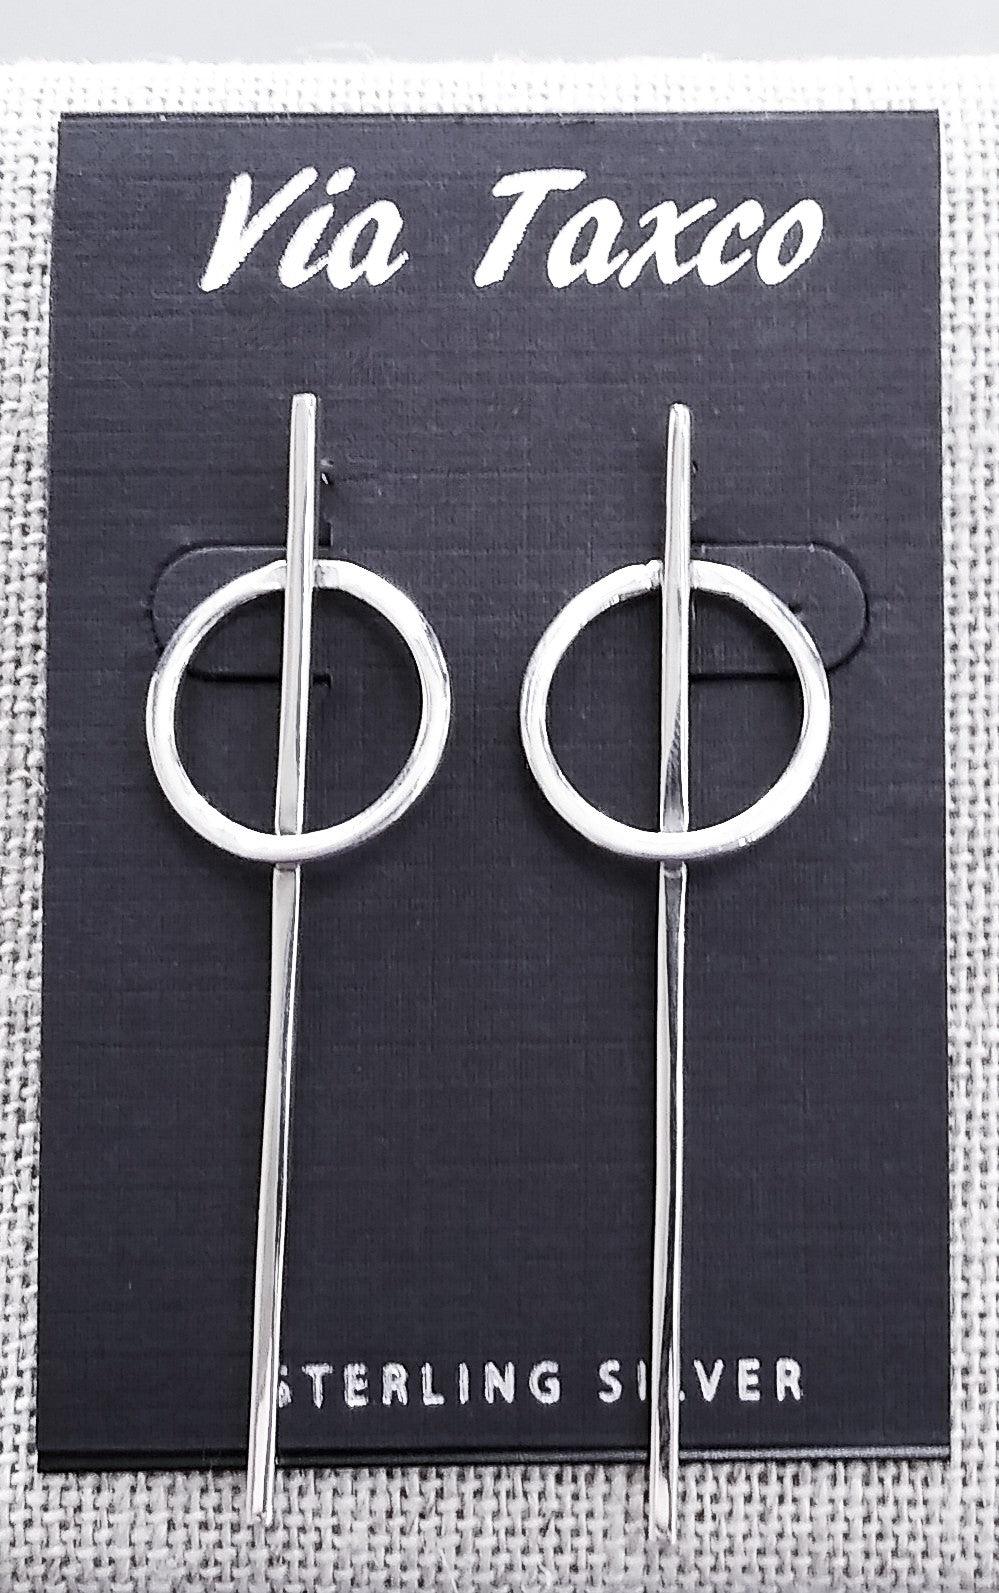 Sterling silver post earrings. A long, thin silver bar stretches through a circular hoop at the top of the earring.